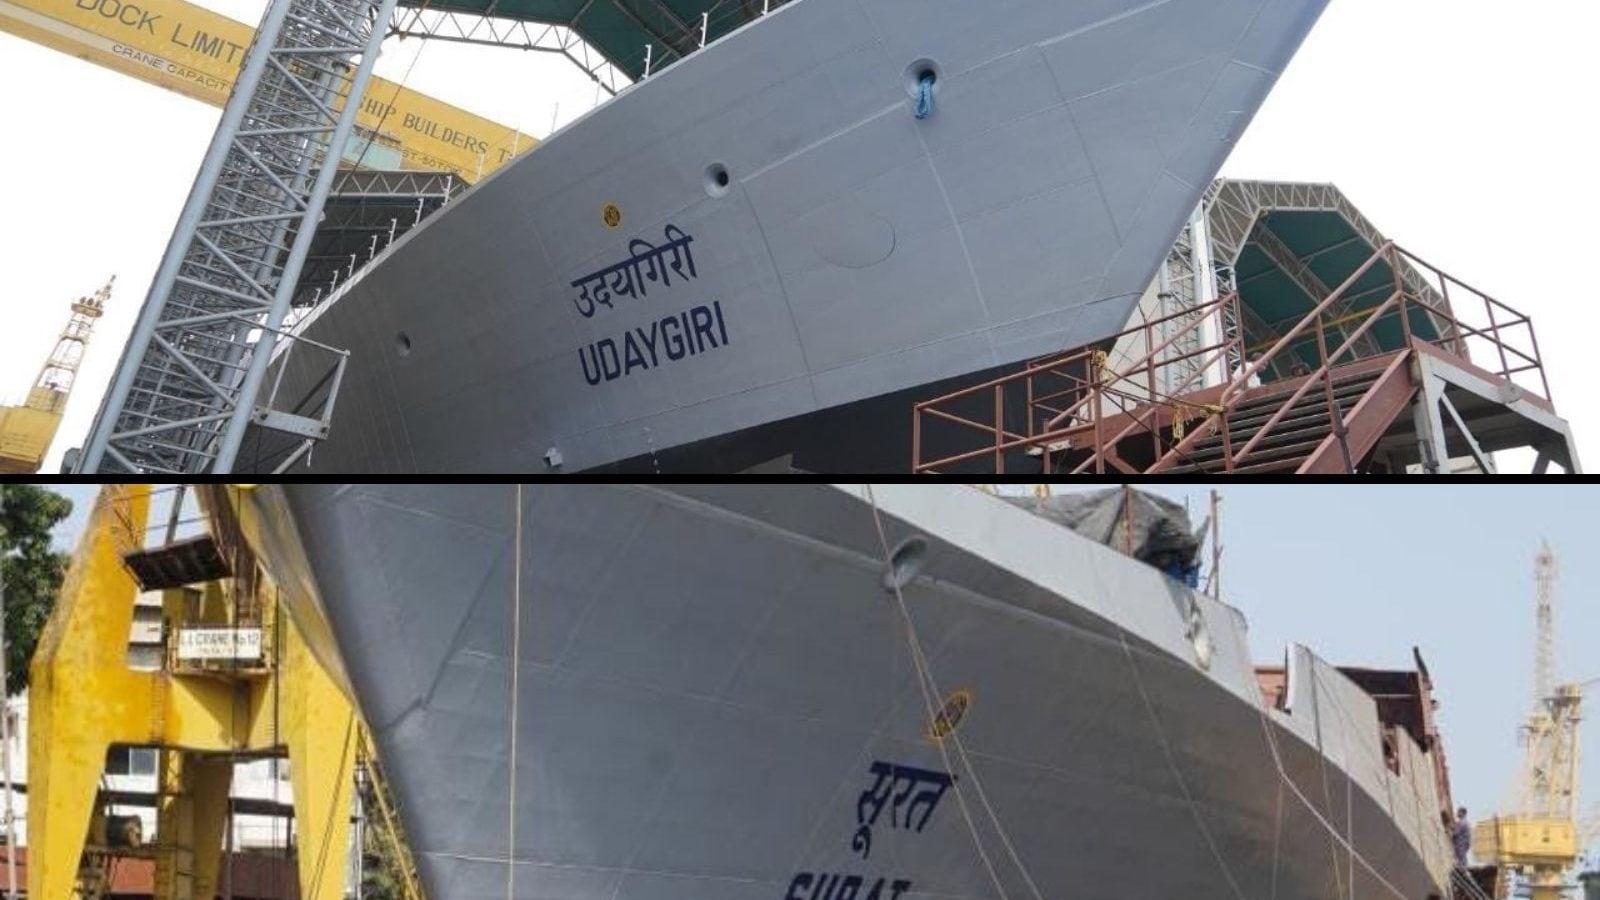 Rajnath Singh launches India-made warships, INS Surat and INS Udaygiri_40.1